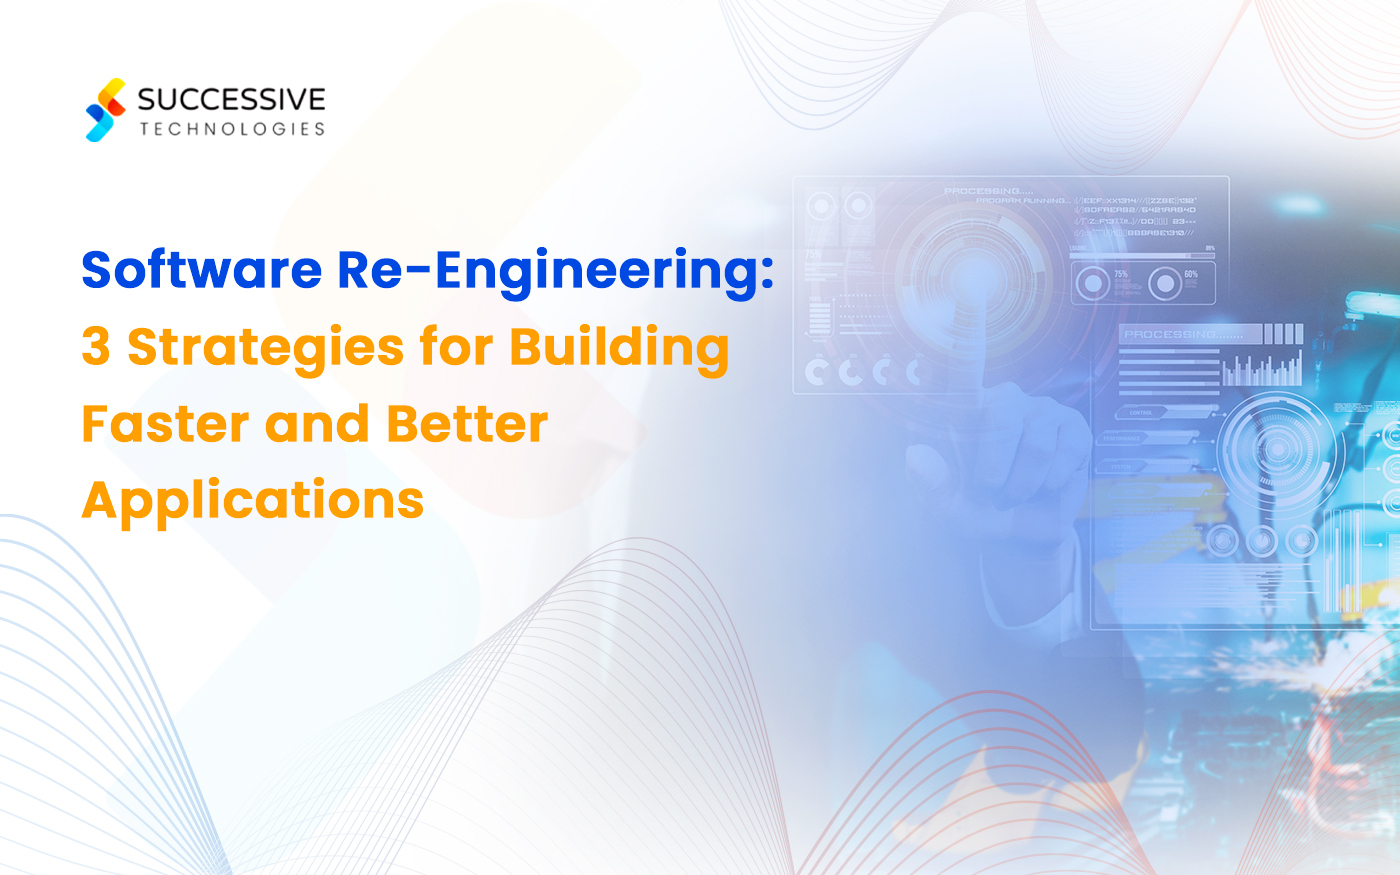 Software Re-Engineering: 3 Strategies for Building Faster & Better Applications